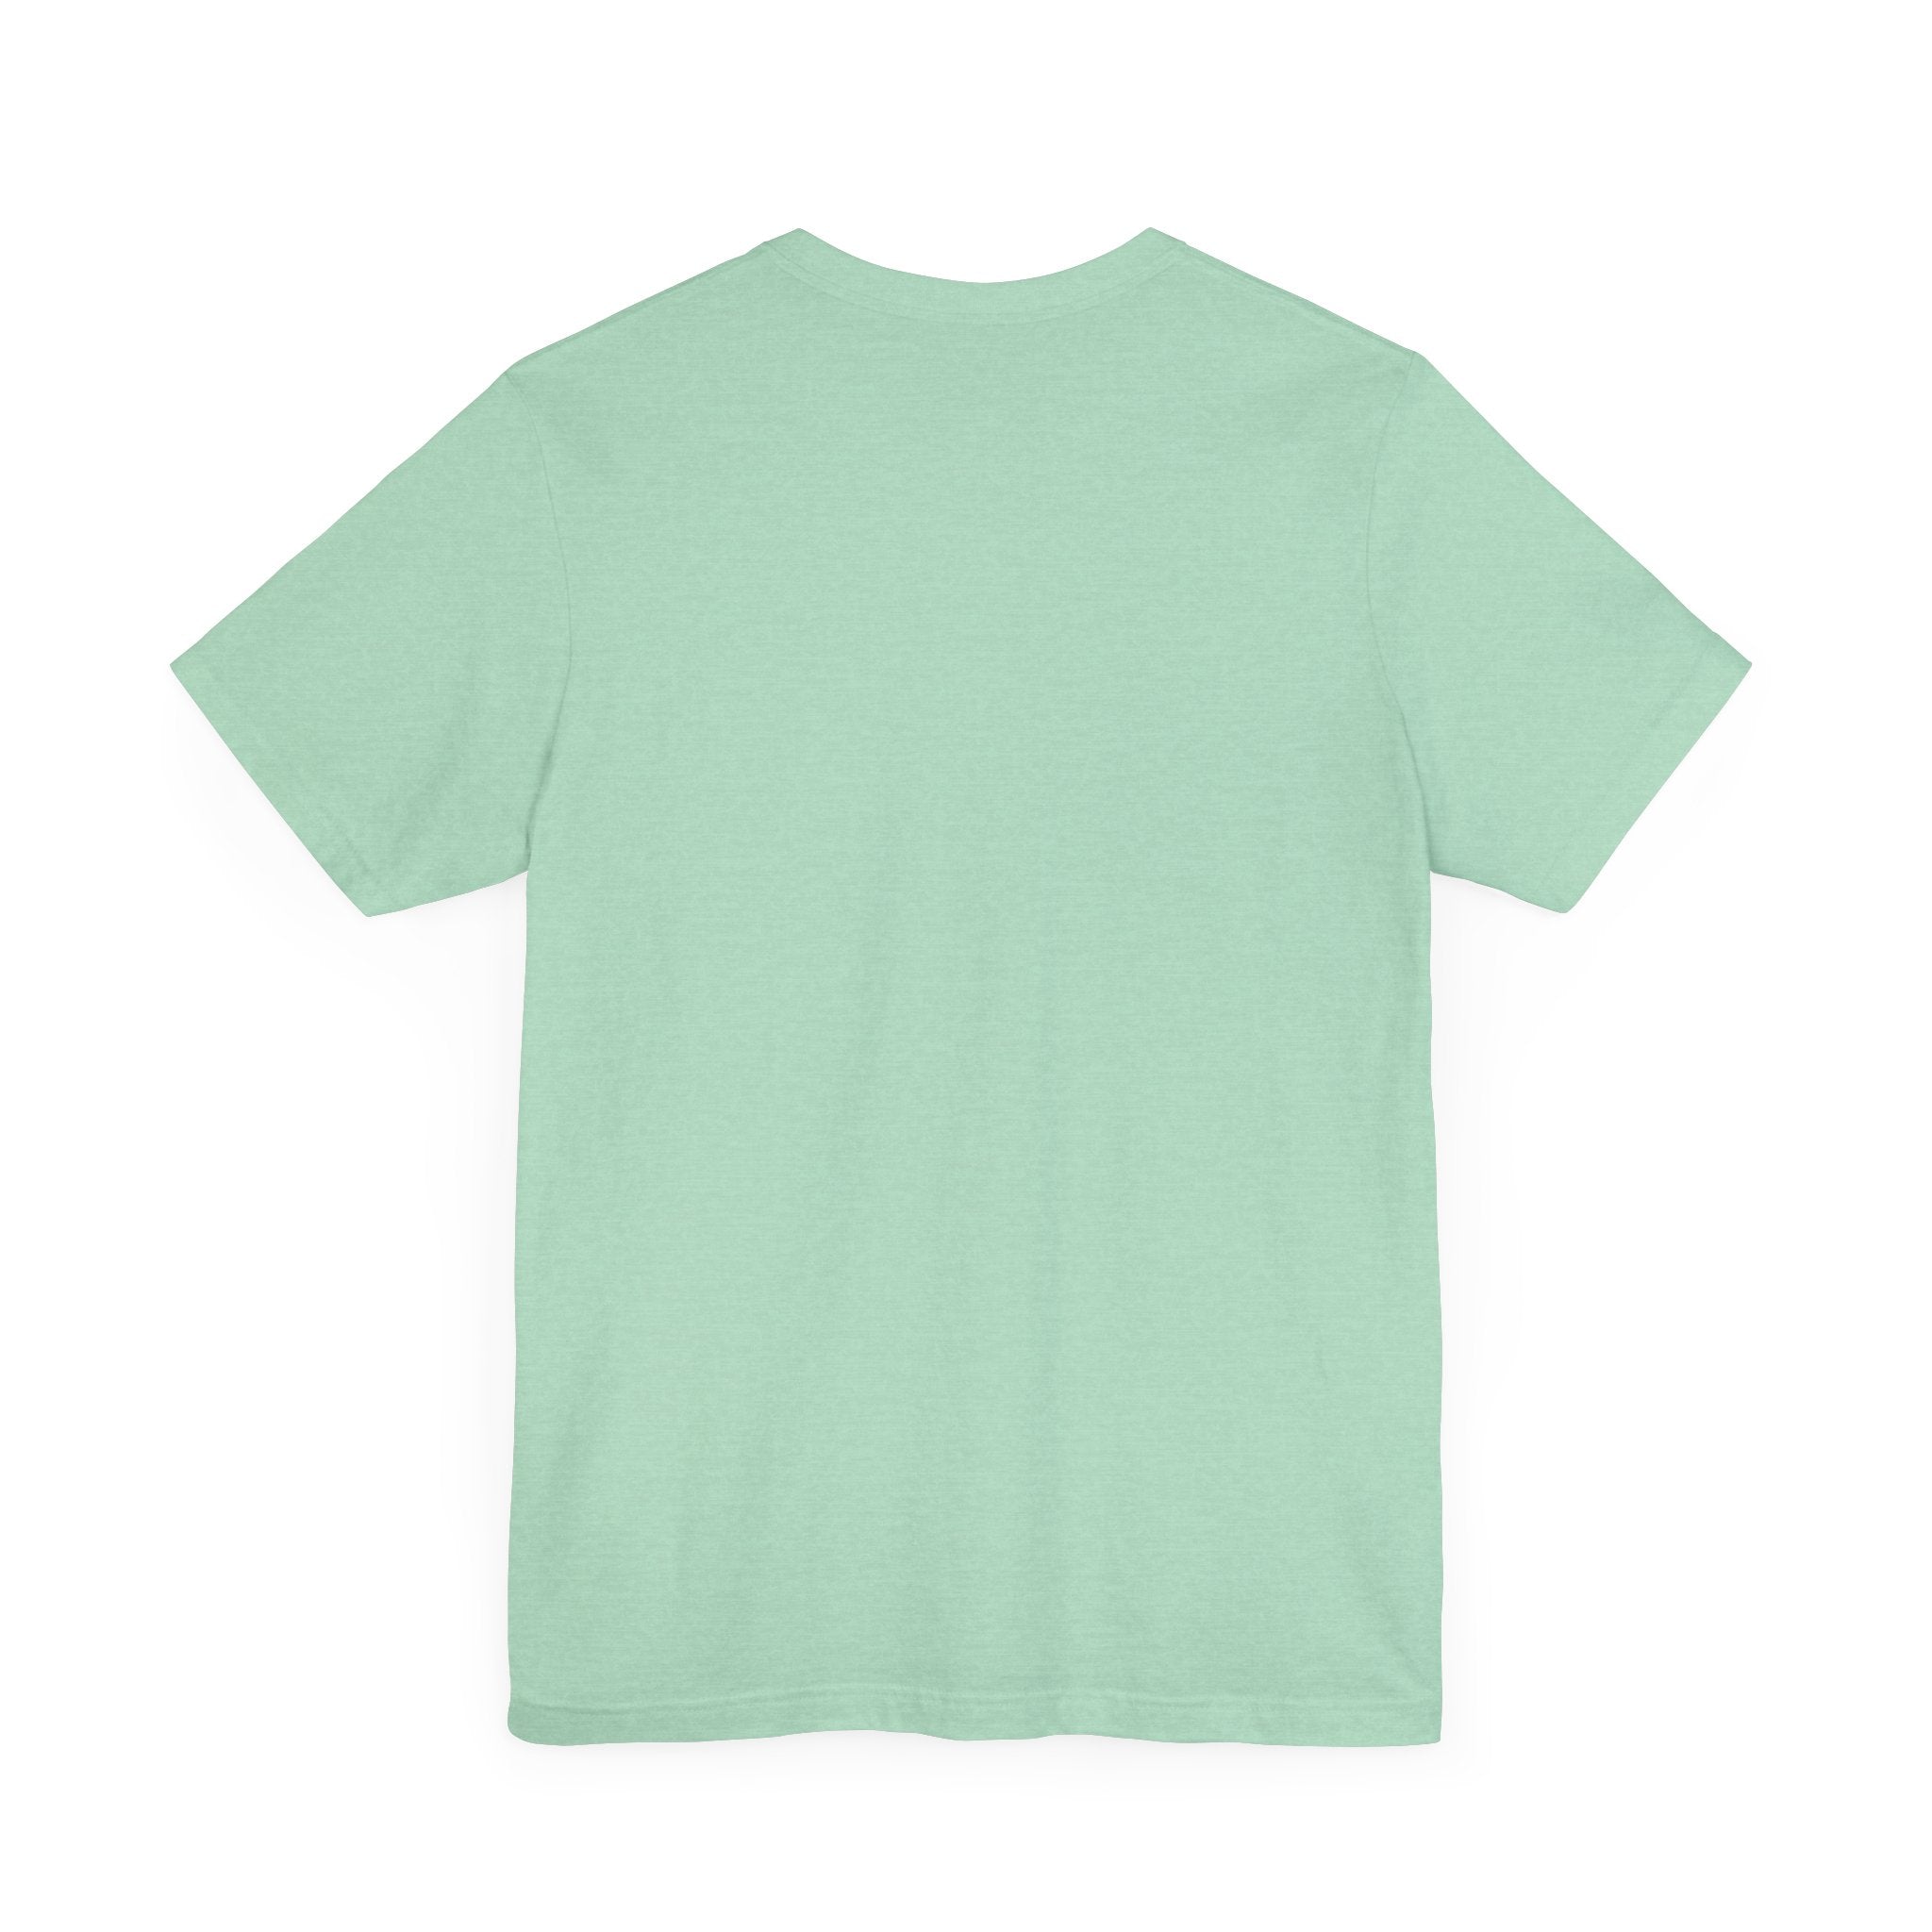 Unisex light green W-H-At?-tee displayed against a white background, viewed from the back.